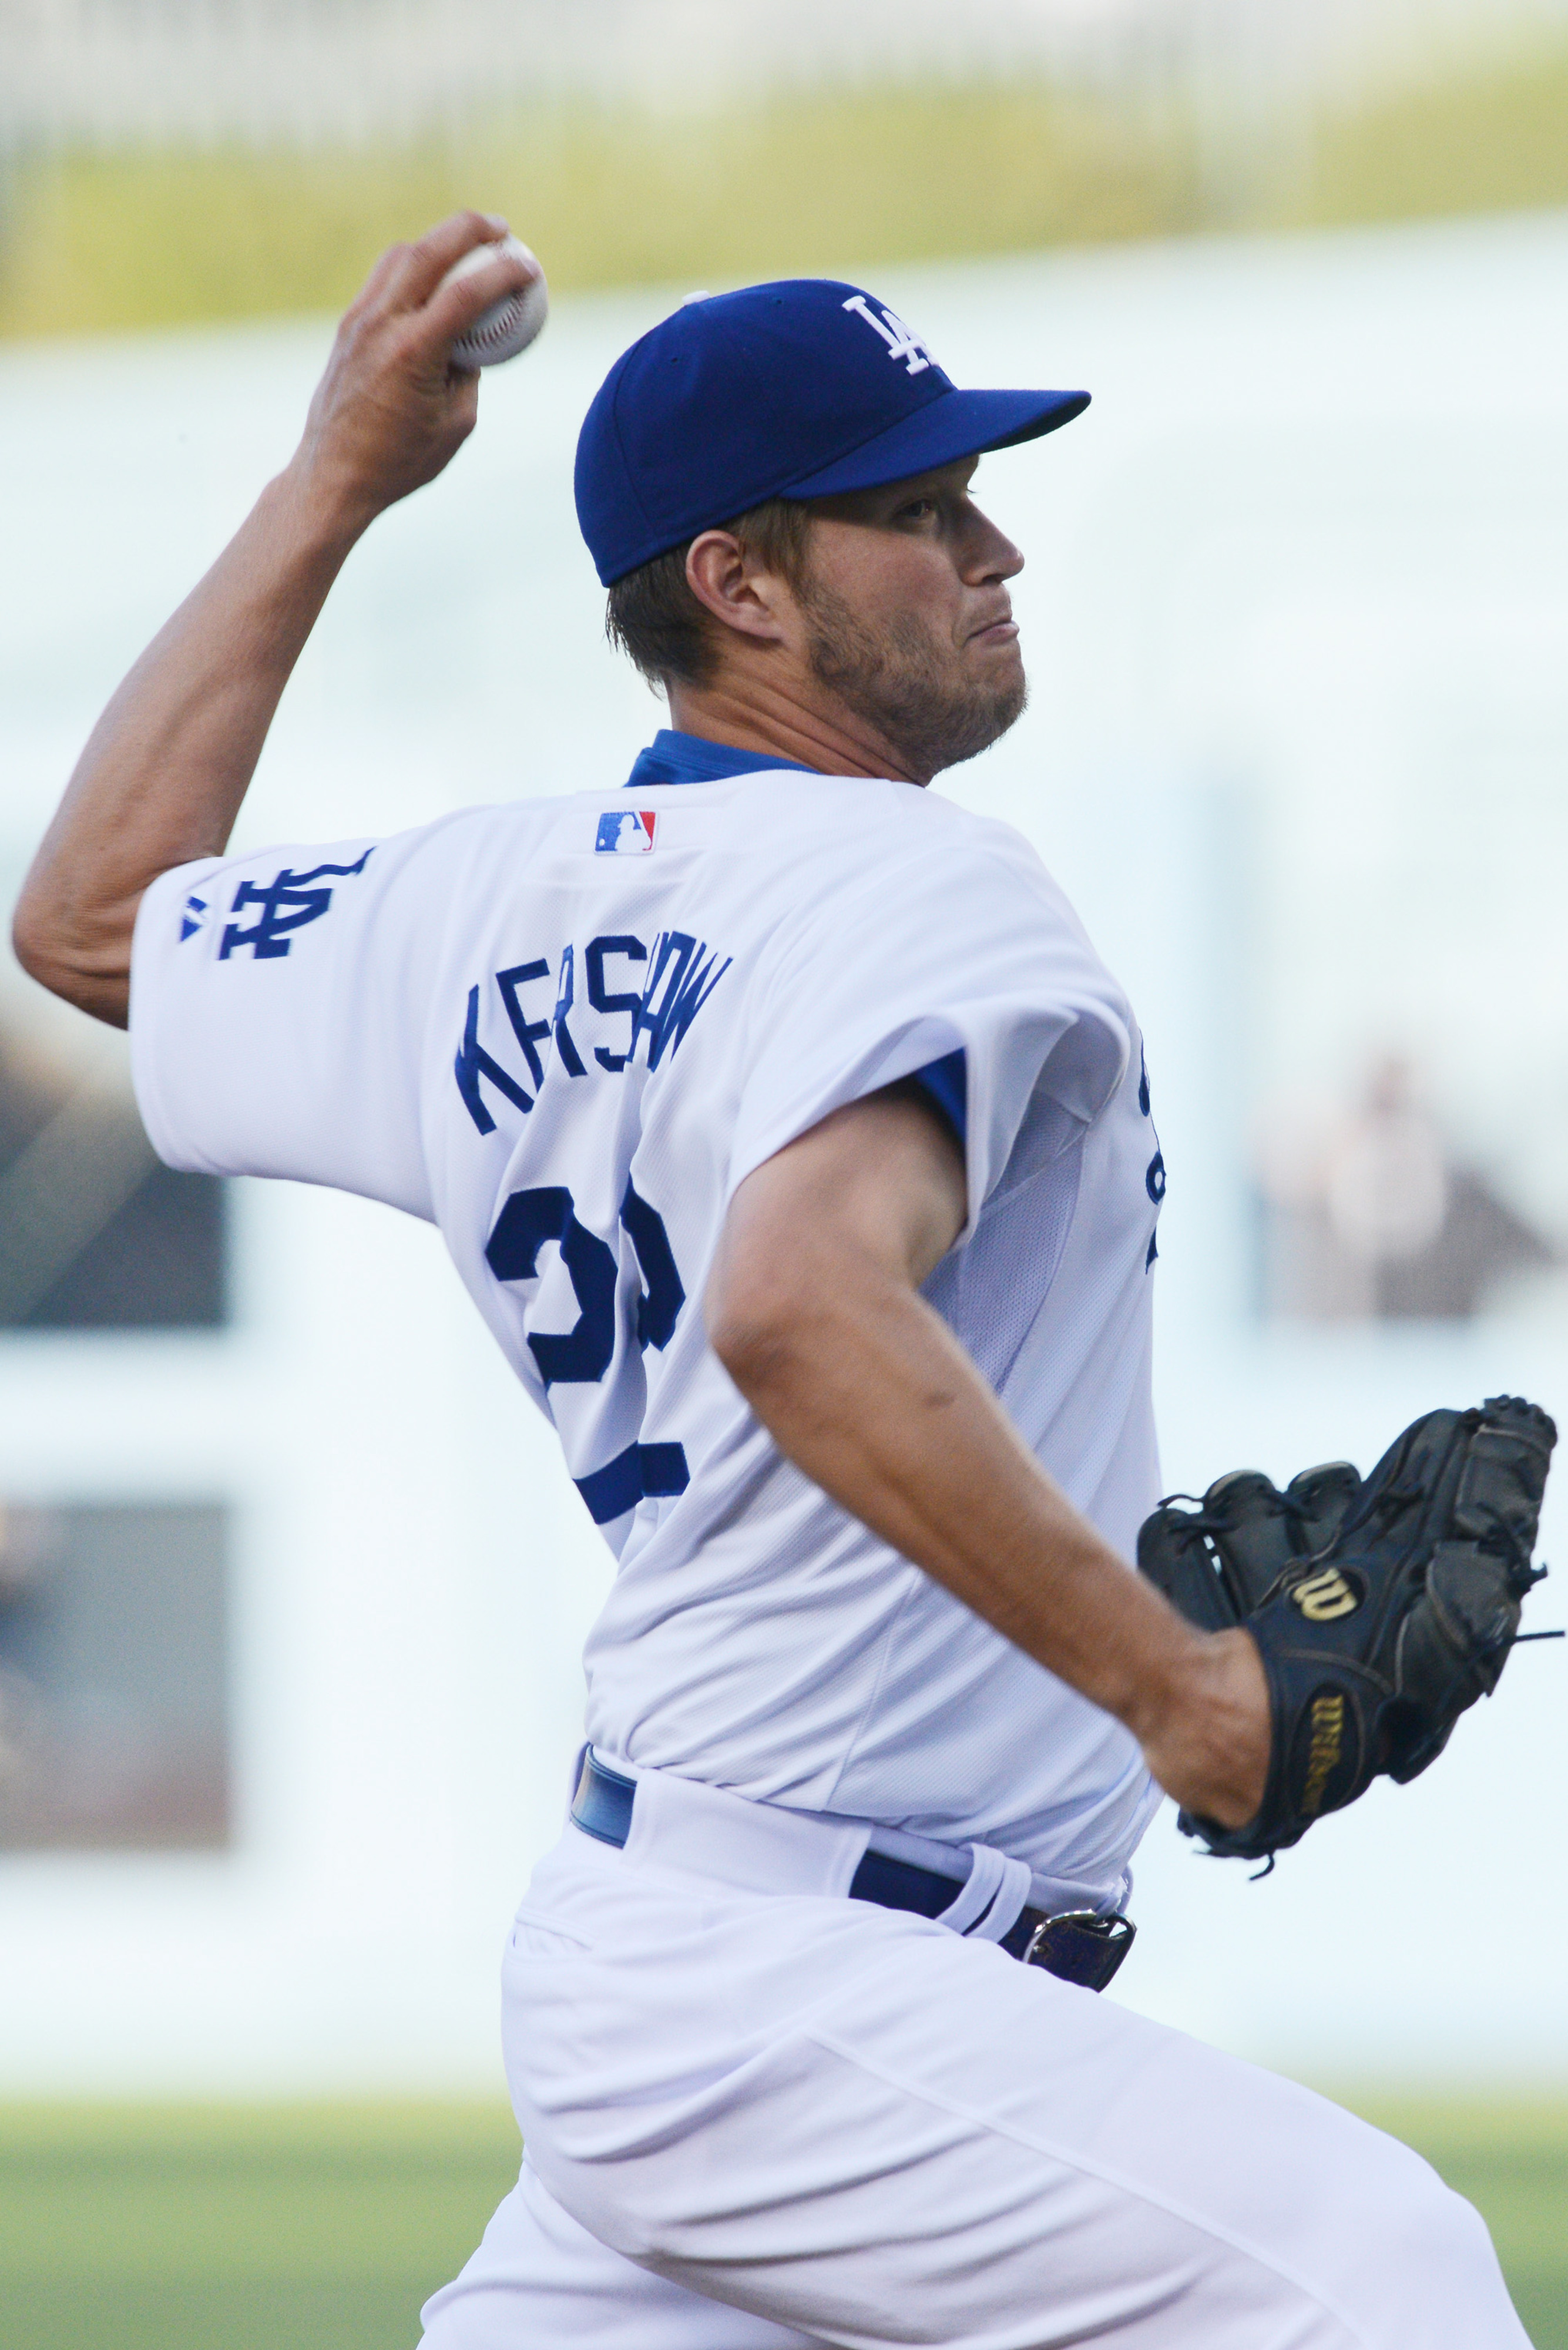 Clayton Kershaw was highly focused this week and dominated opposing batters.